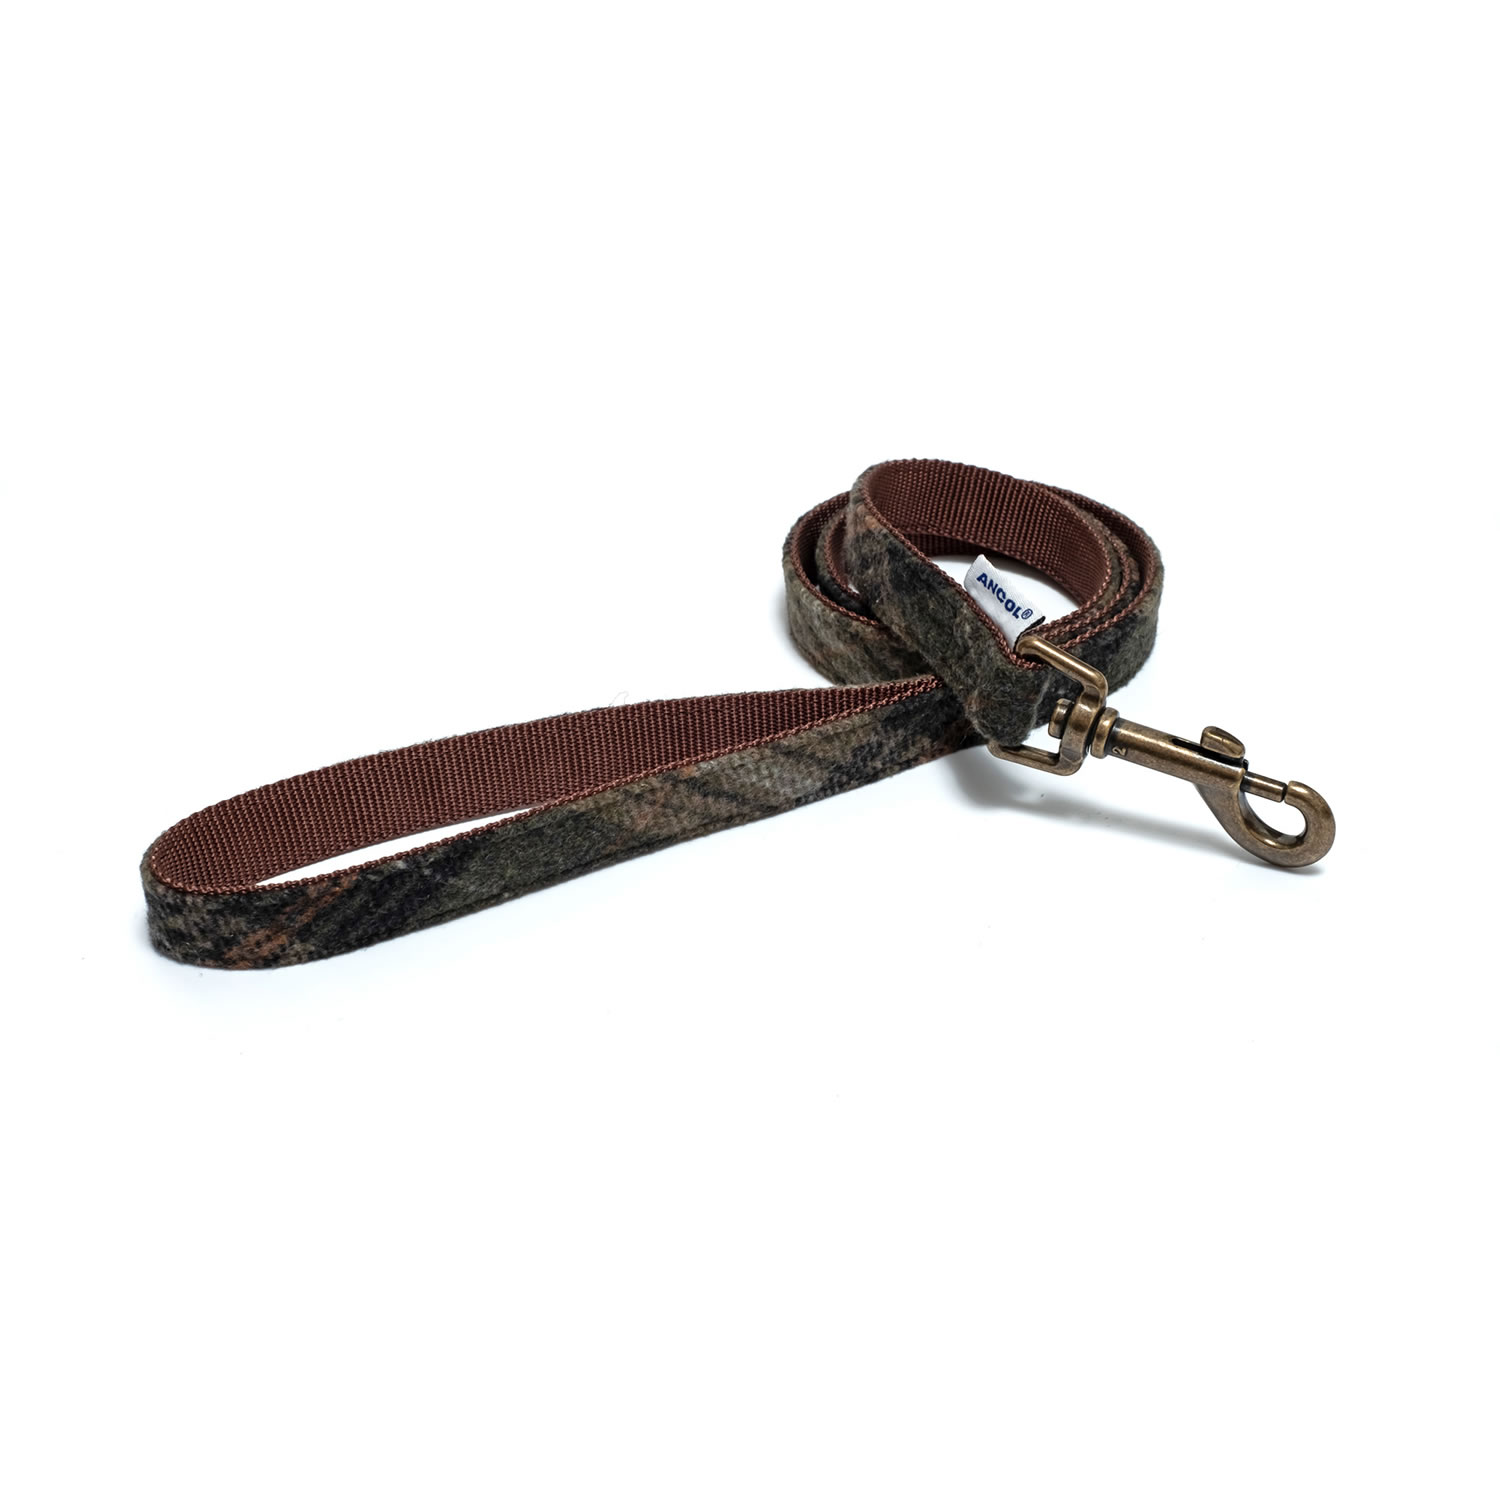 ANCOL COUNTRY CHECK LEAD ANCOL COUNTRY CHECK LEAD 1 M X 19 MM COUNTRY 1 M X 19 MM